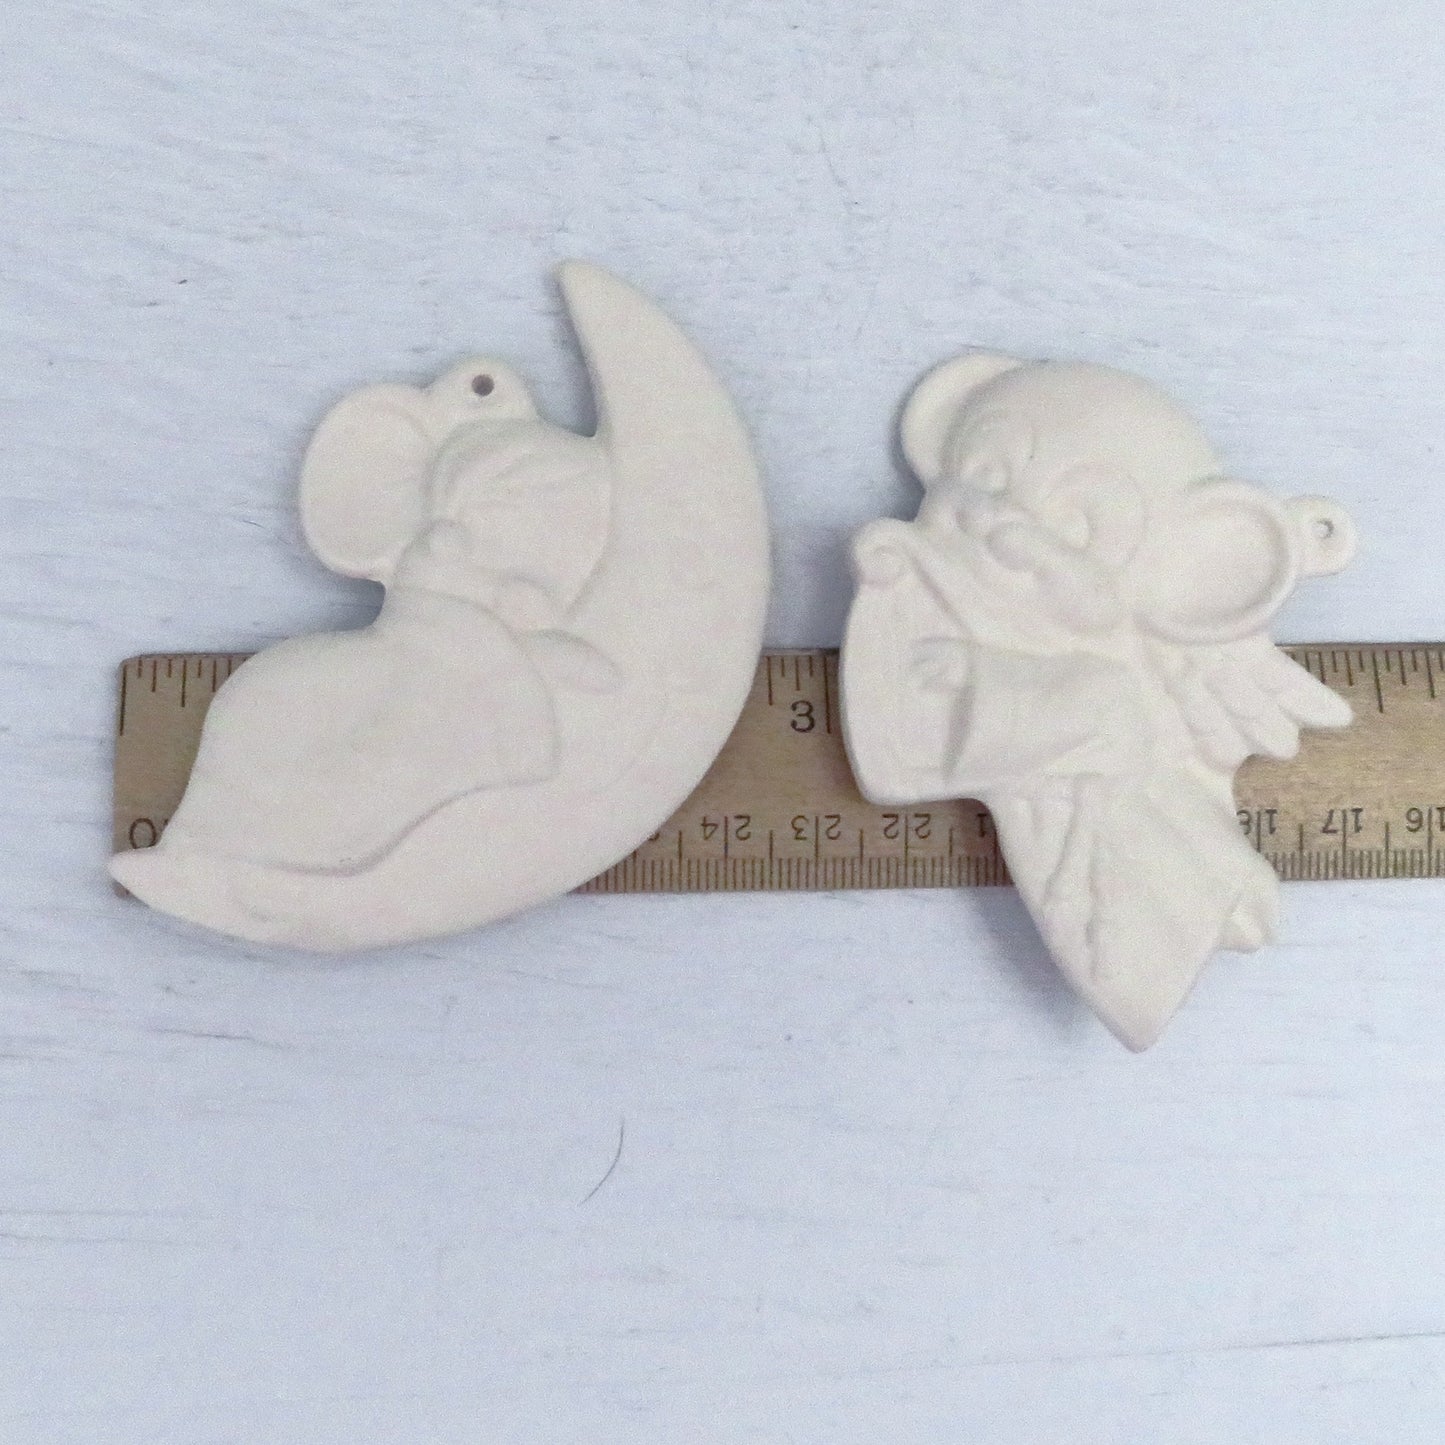 Handmade Ready to Paint Ceramic Christmas Tree Ornaments with a Mouse on a Moon and Mouse with a Harp, Paintable Ceramic Christmas Decor